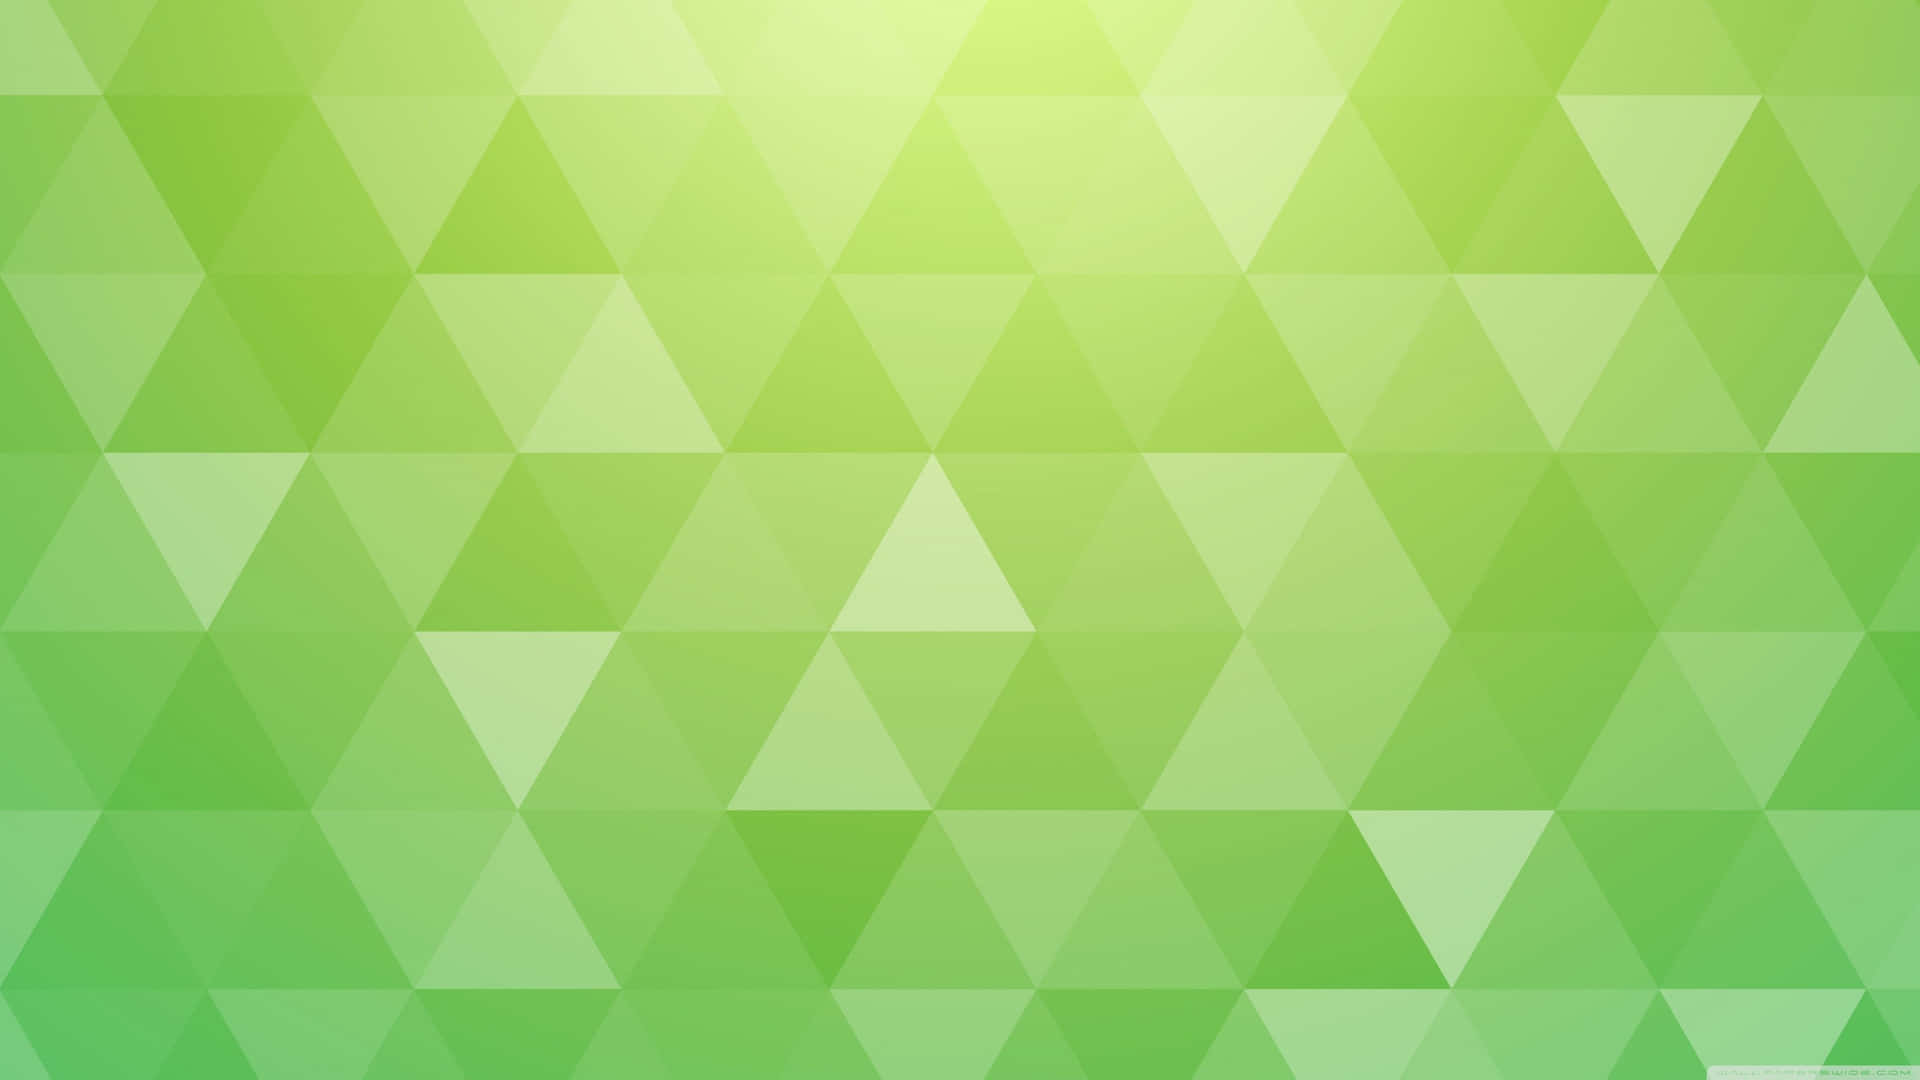 A blissful abstract green background